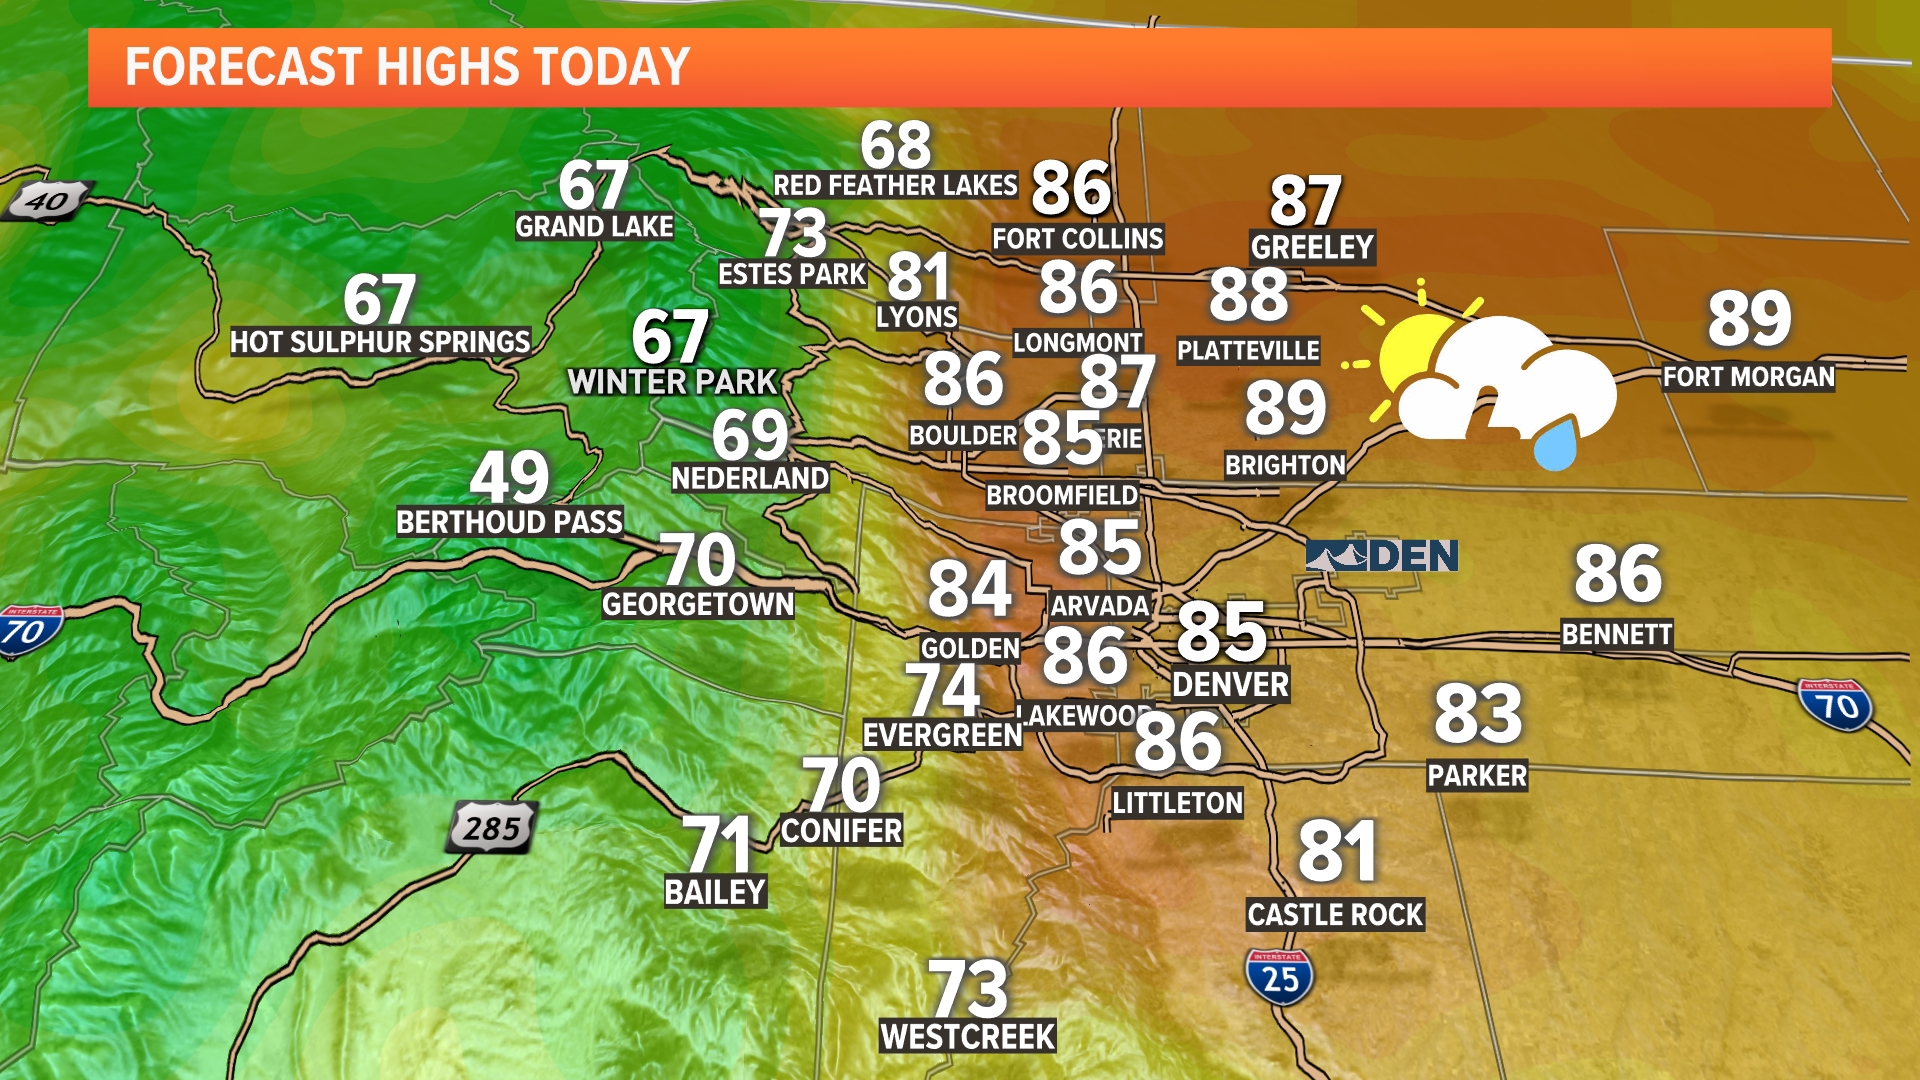 Colorado will start to see more sunshine and less in the way of storms heading into the weekend.